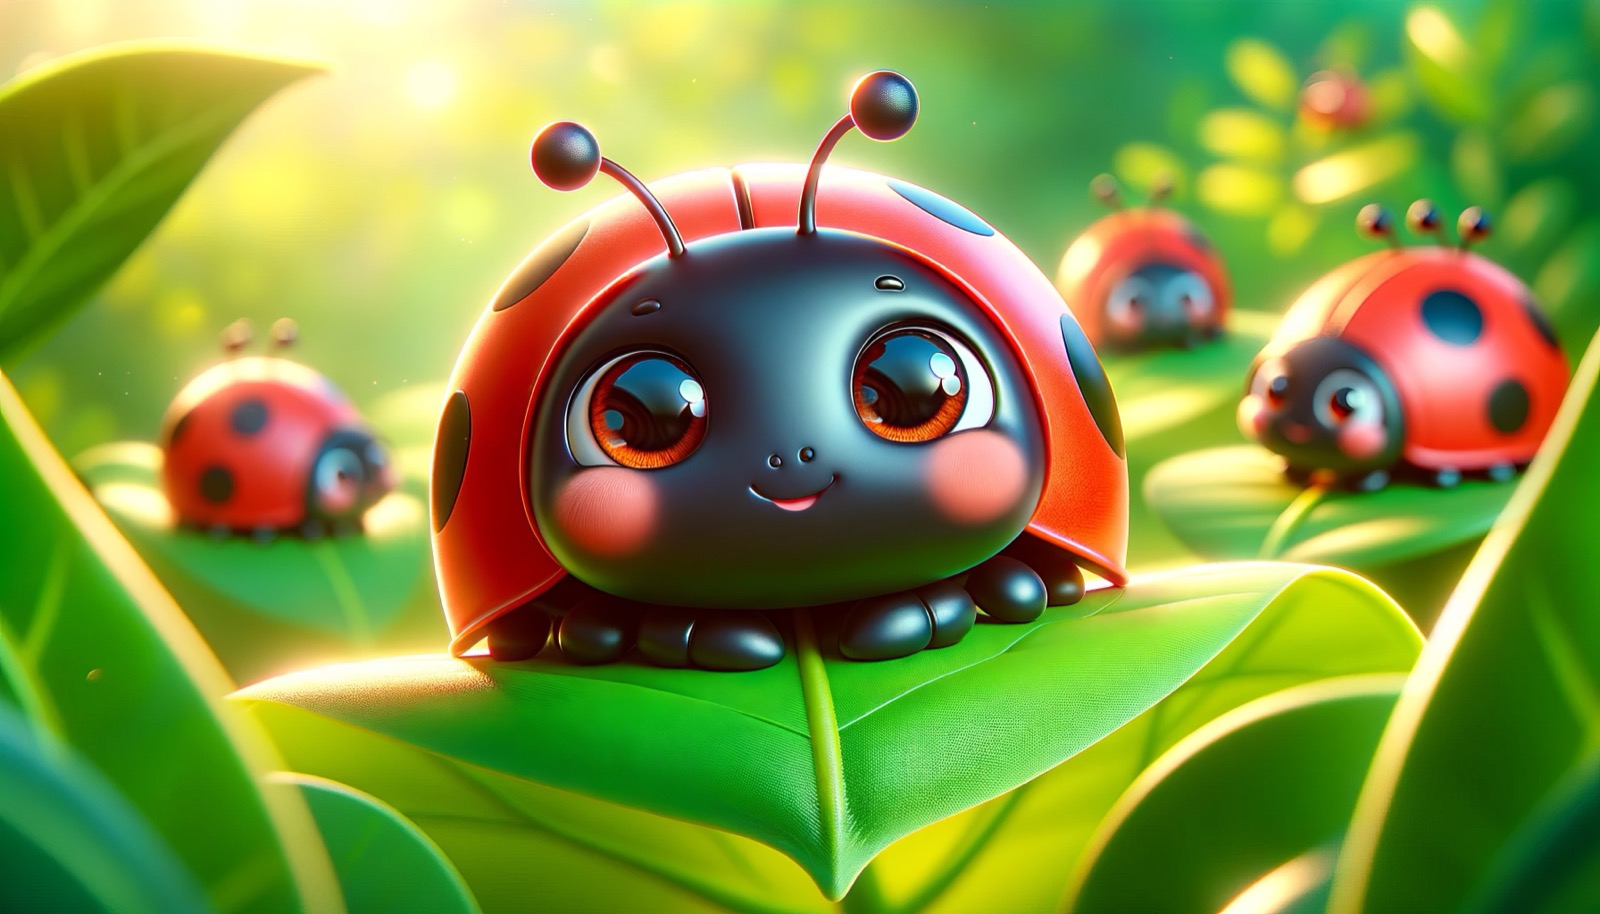 You got: Ladybug! ClutterBug Quiz – What Type of ClutterBug Are You?